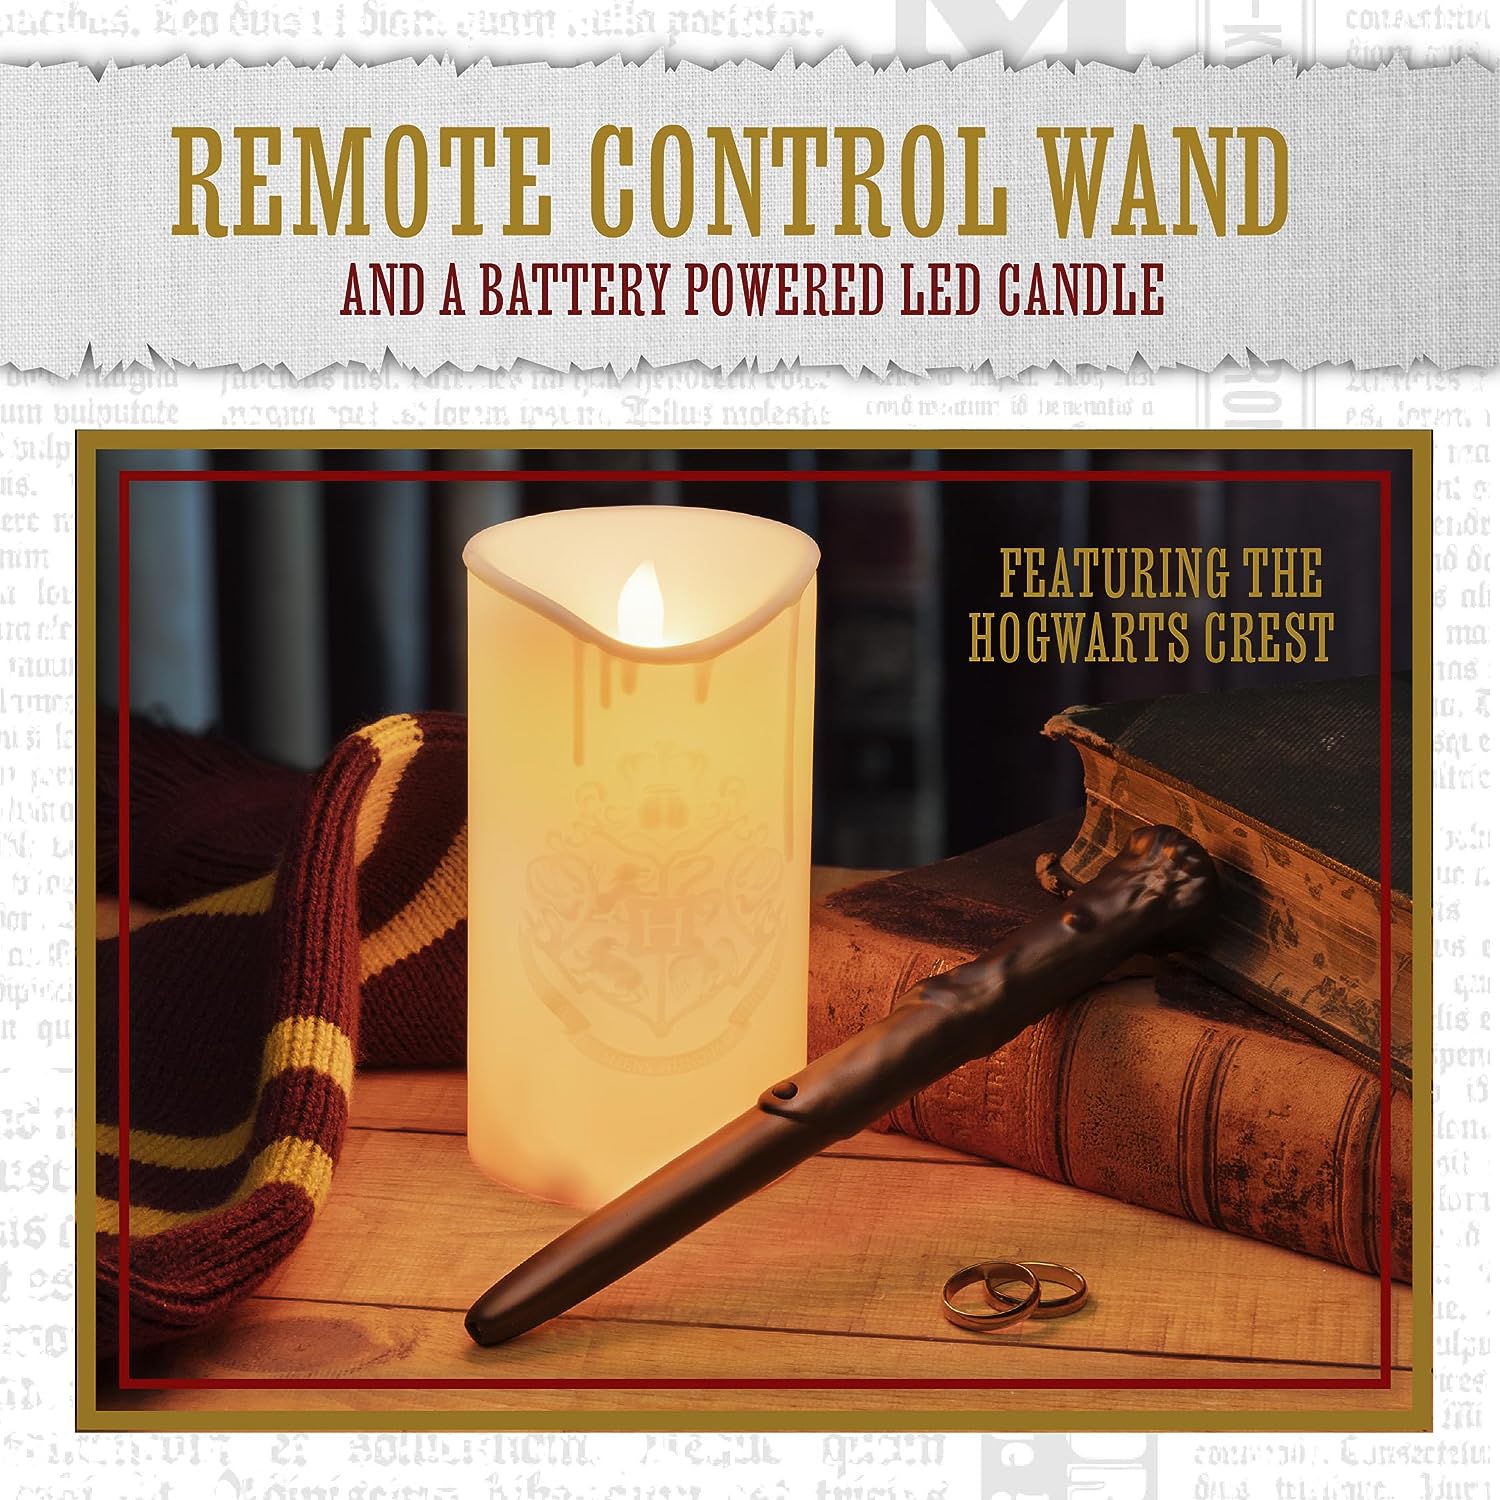 BEMS  HARRY POTTER - Candle light- Light with wand control